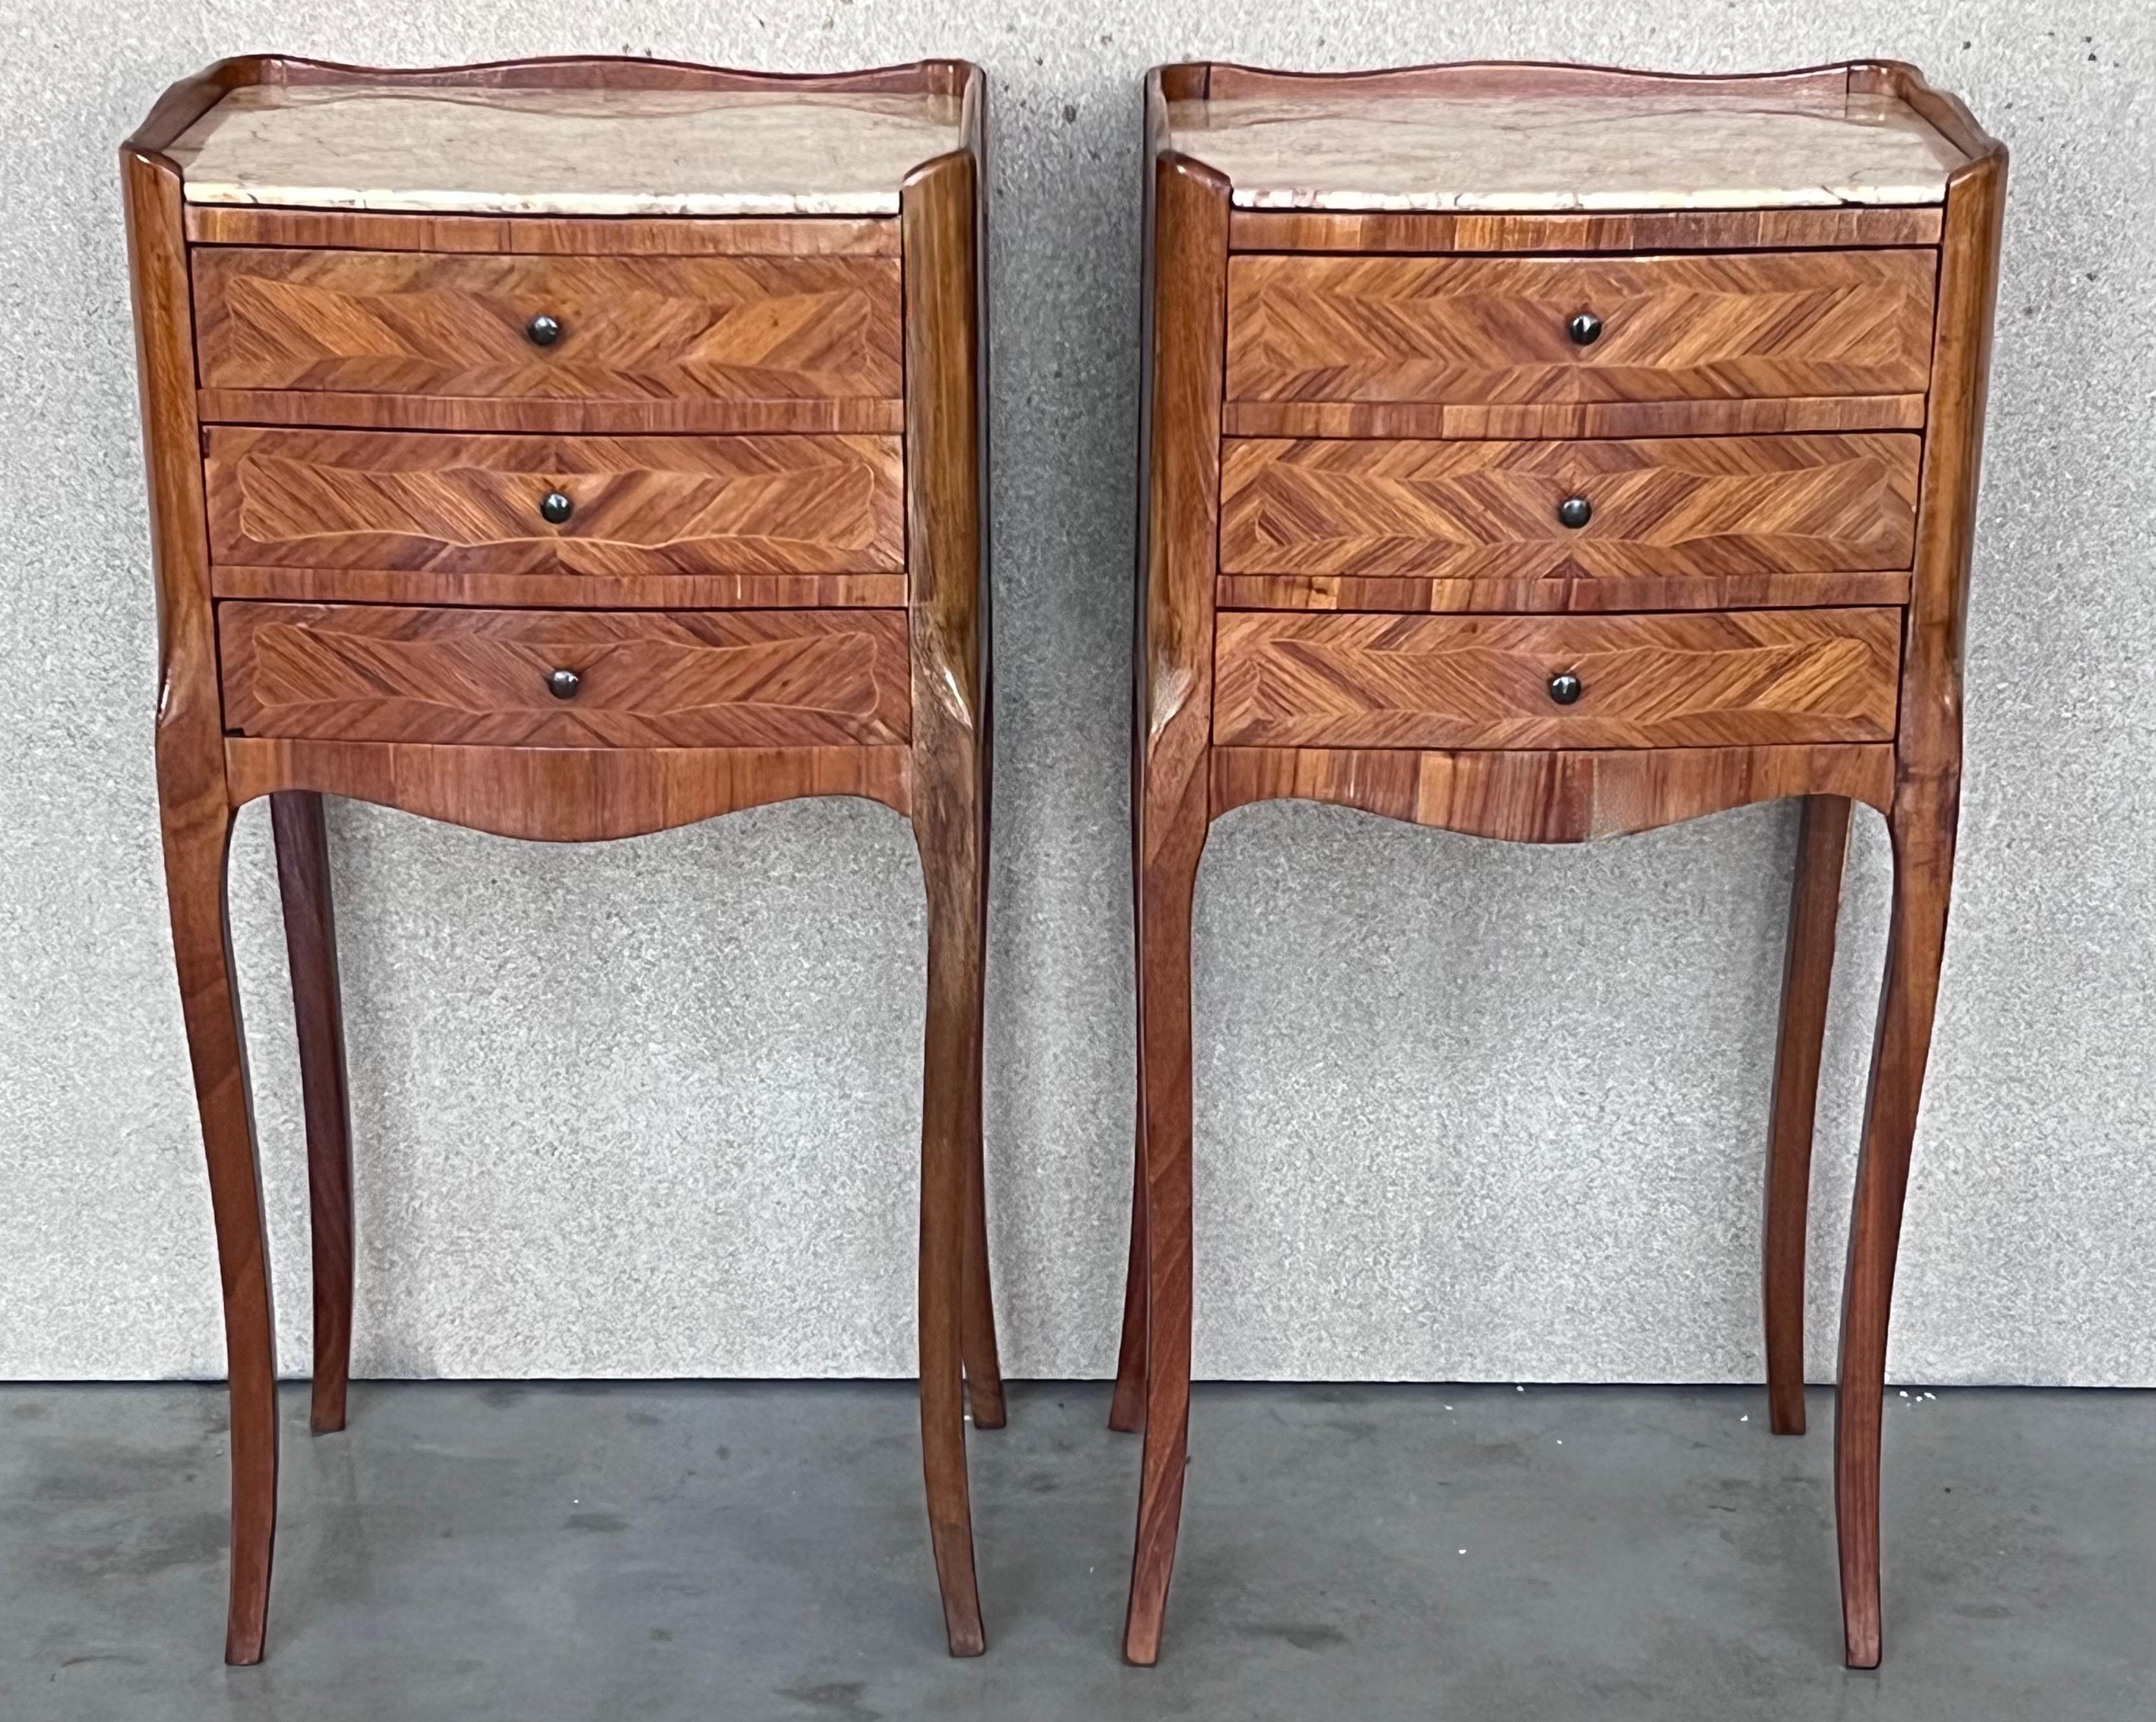 Antique French Louis XVI style pair of nightstands topped with a white marble, cabriole legs. Three dovetailed small drawers with brass details in pulls each table.